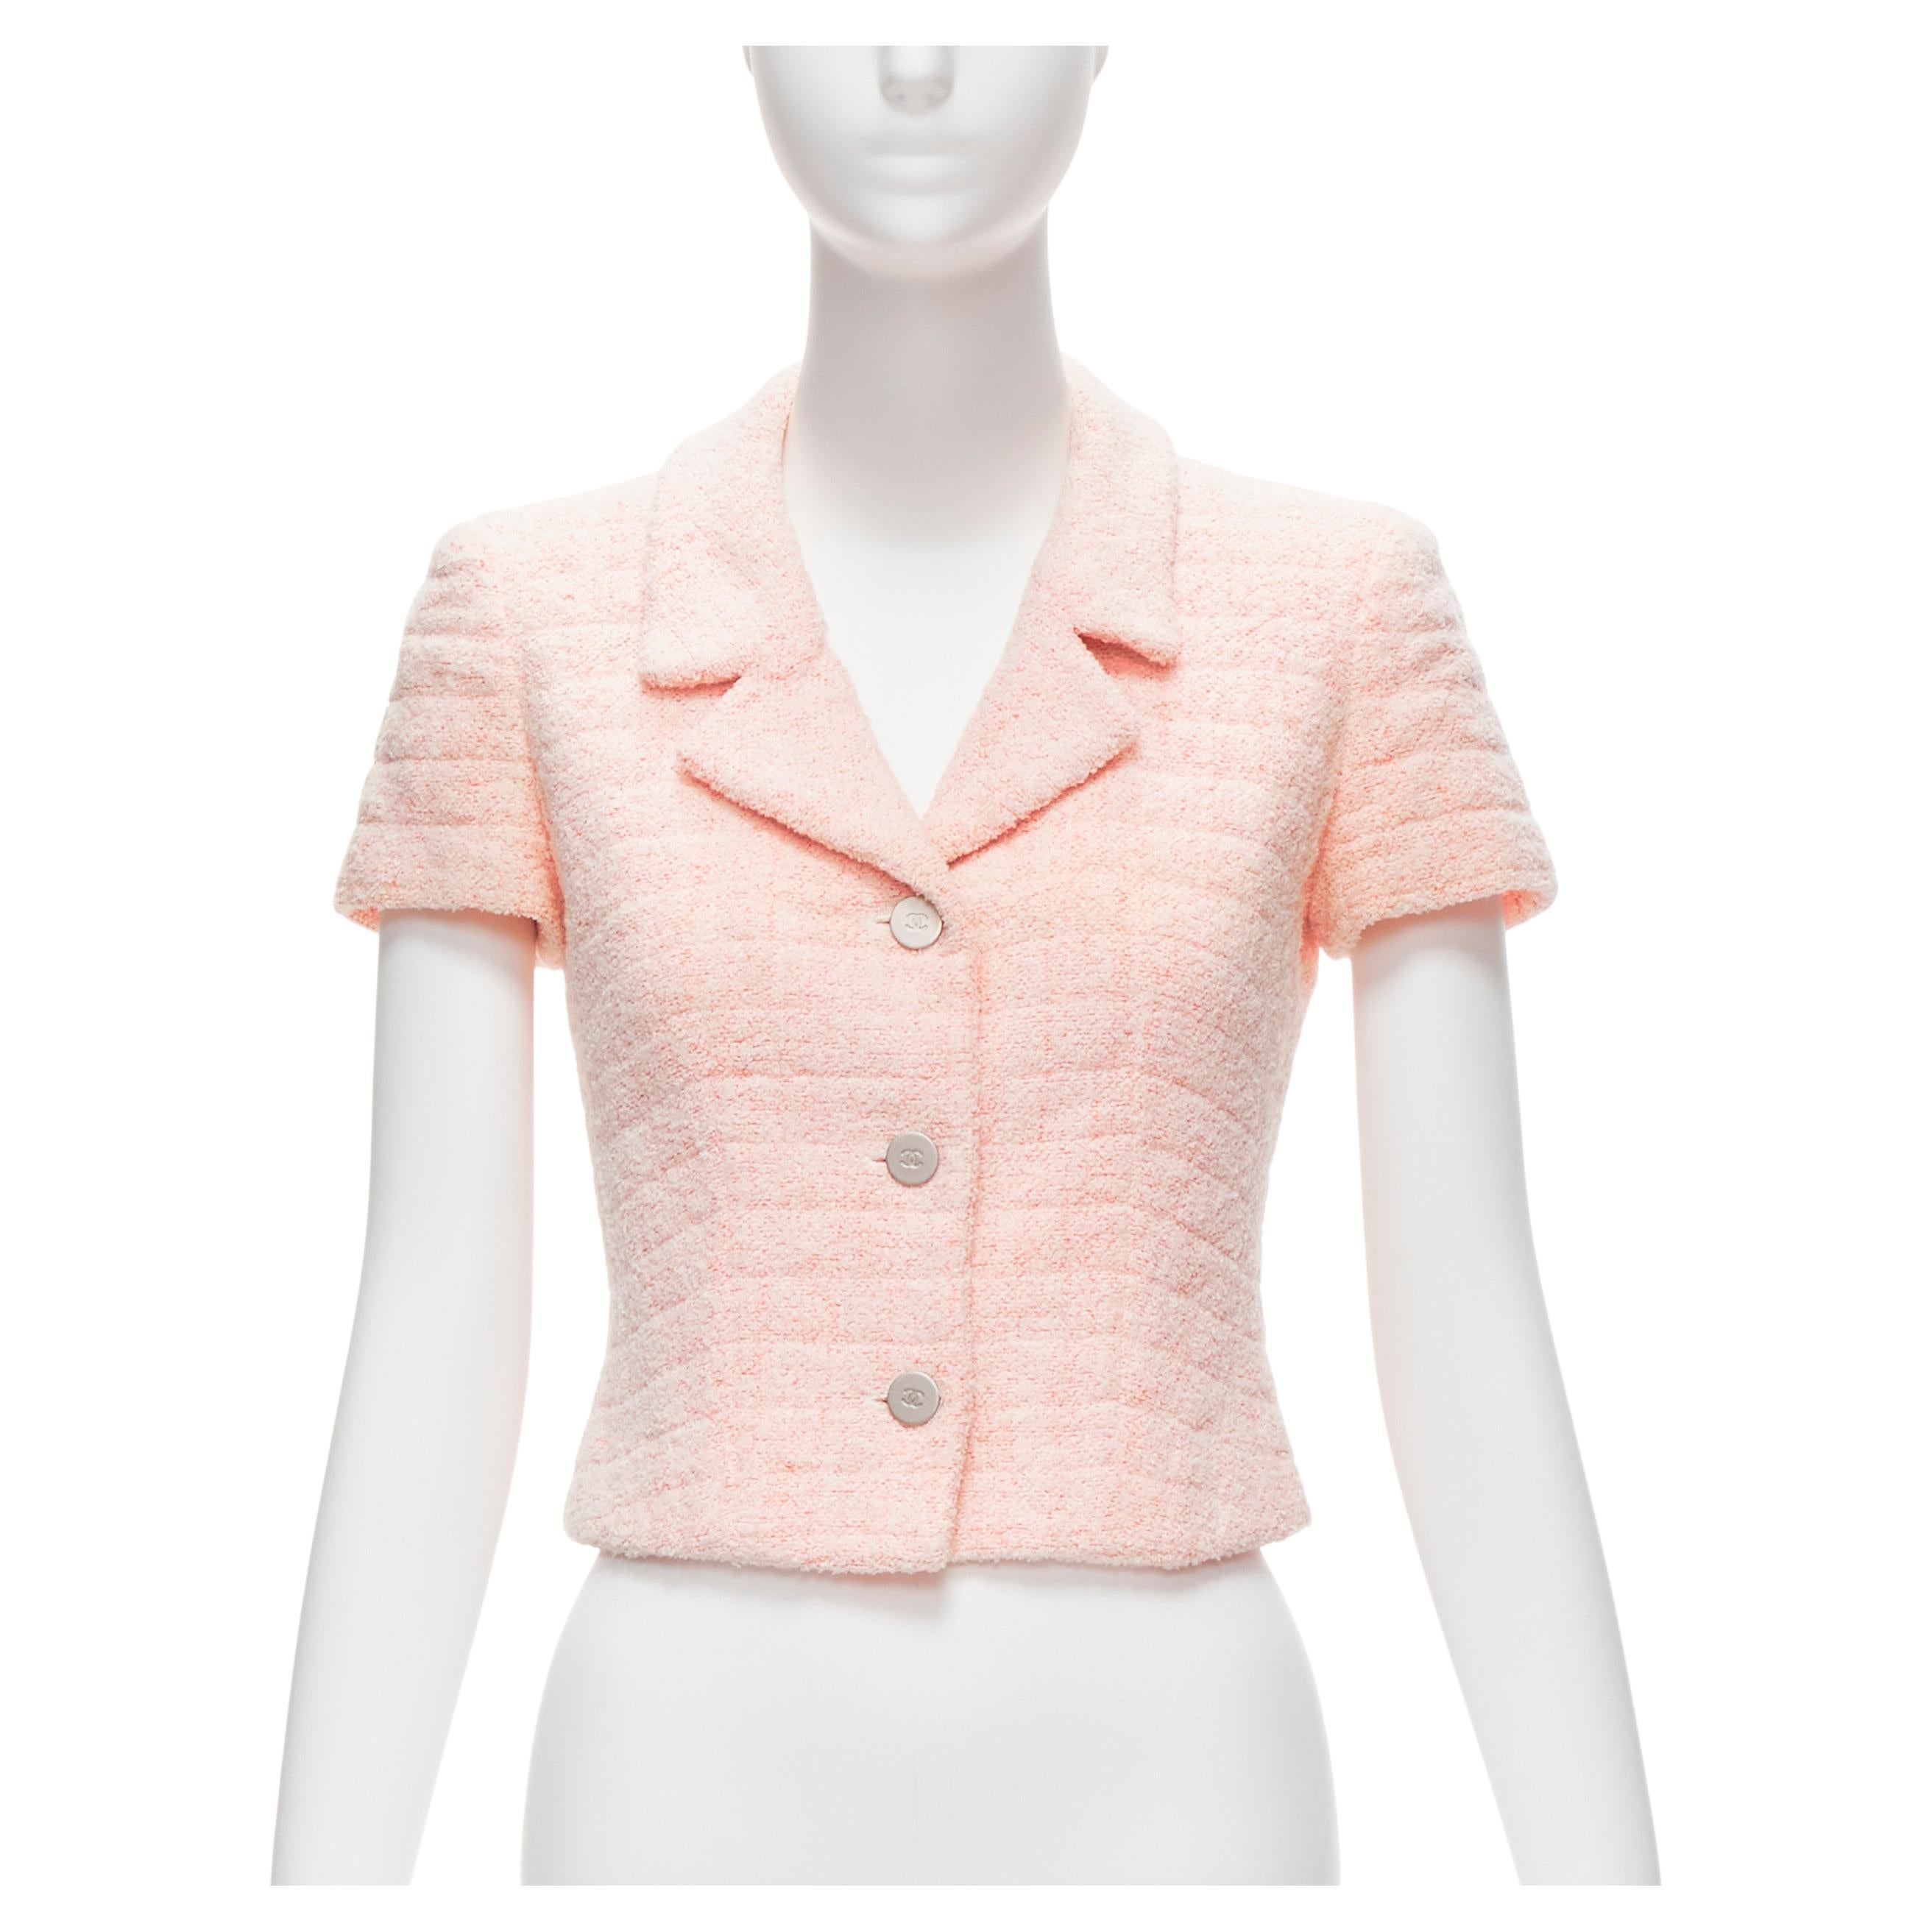 Chanel Pre-owned 1995 CC Button Cropped Jacket - Orange